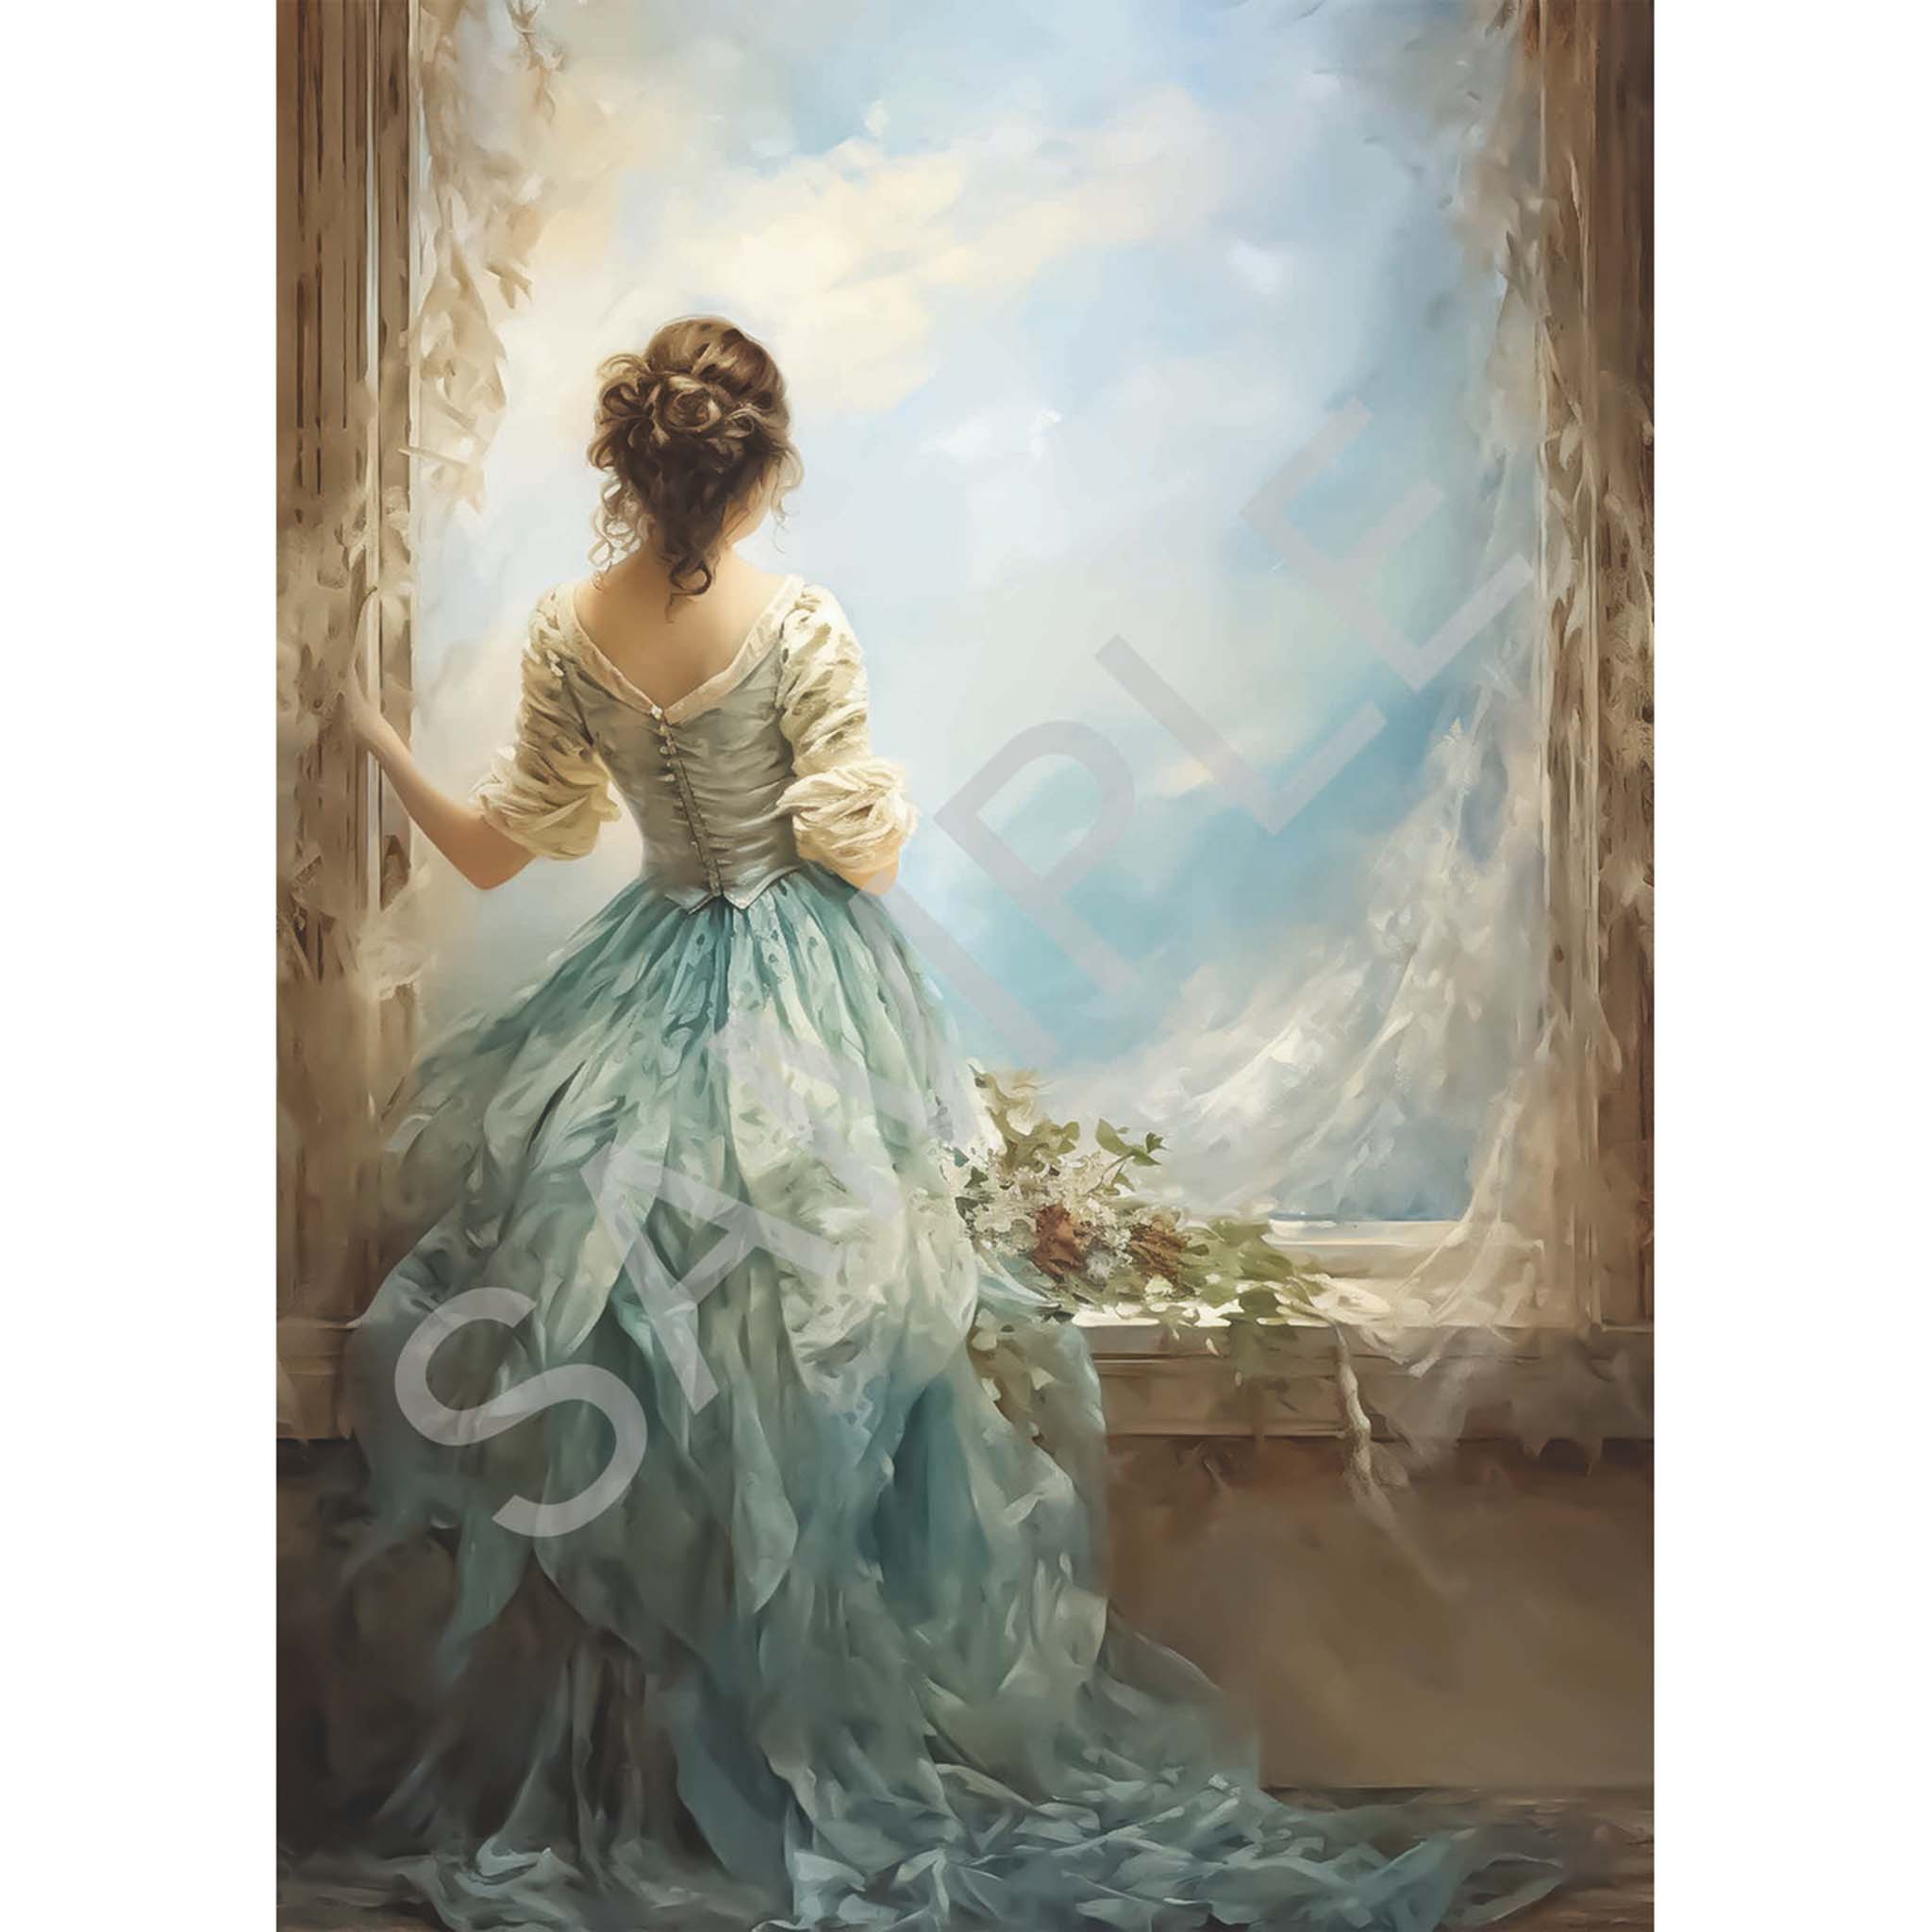 A4 rice paper design that features a stunning woman in a beautiful dress, depicted standing at a window. White borders are on the sides.